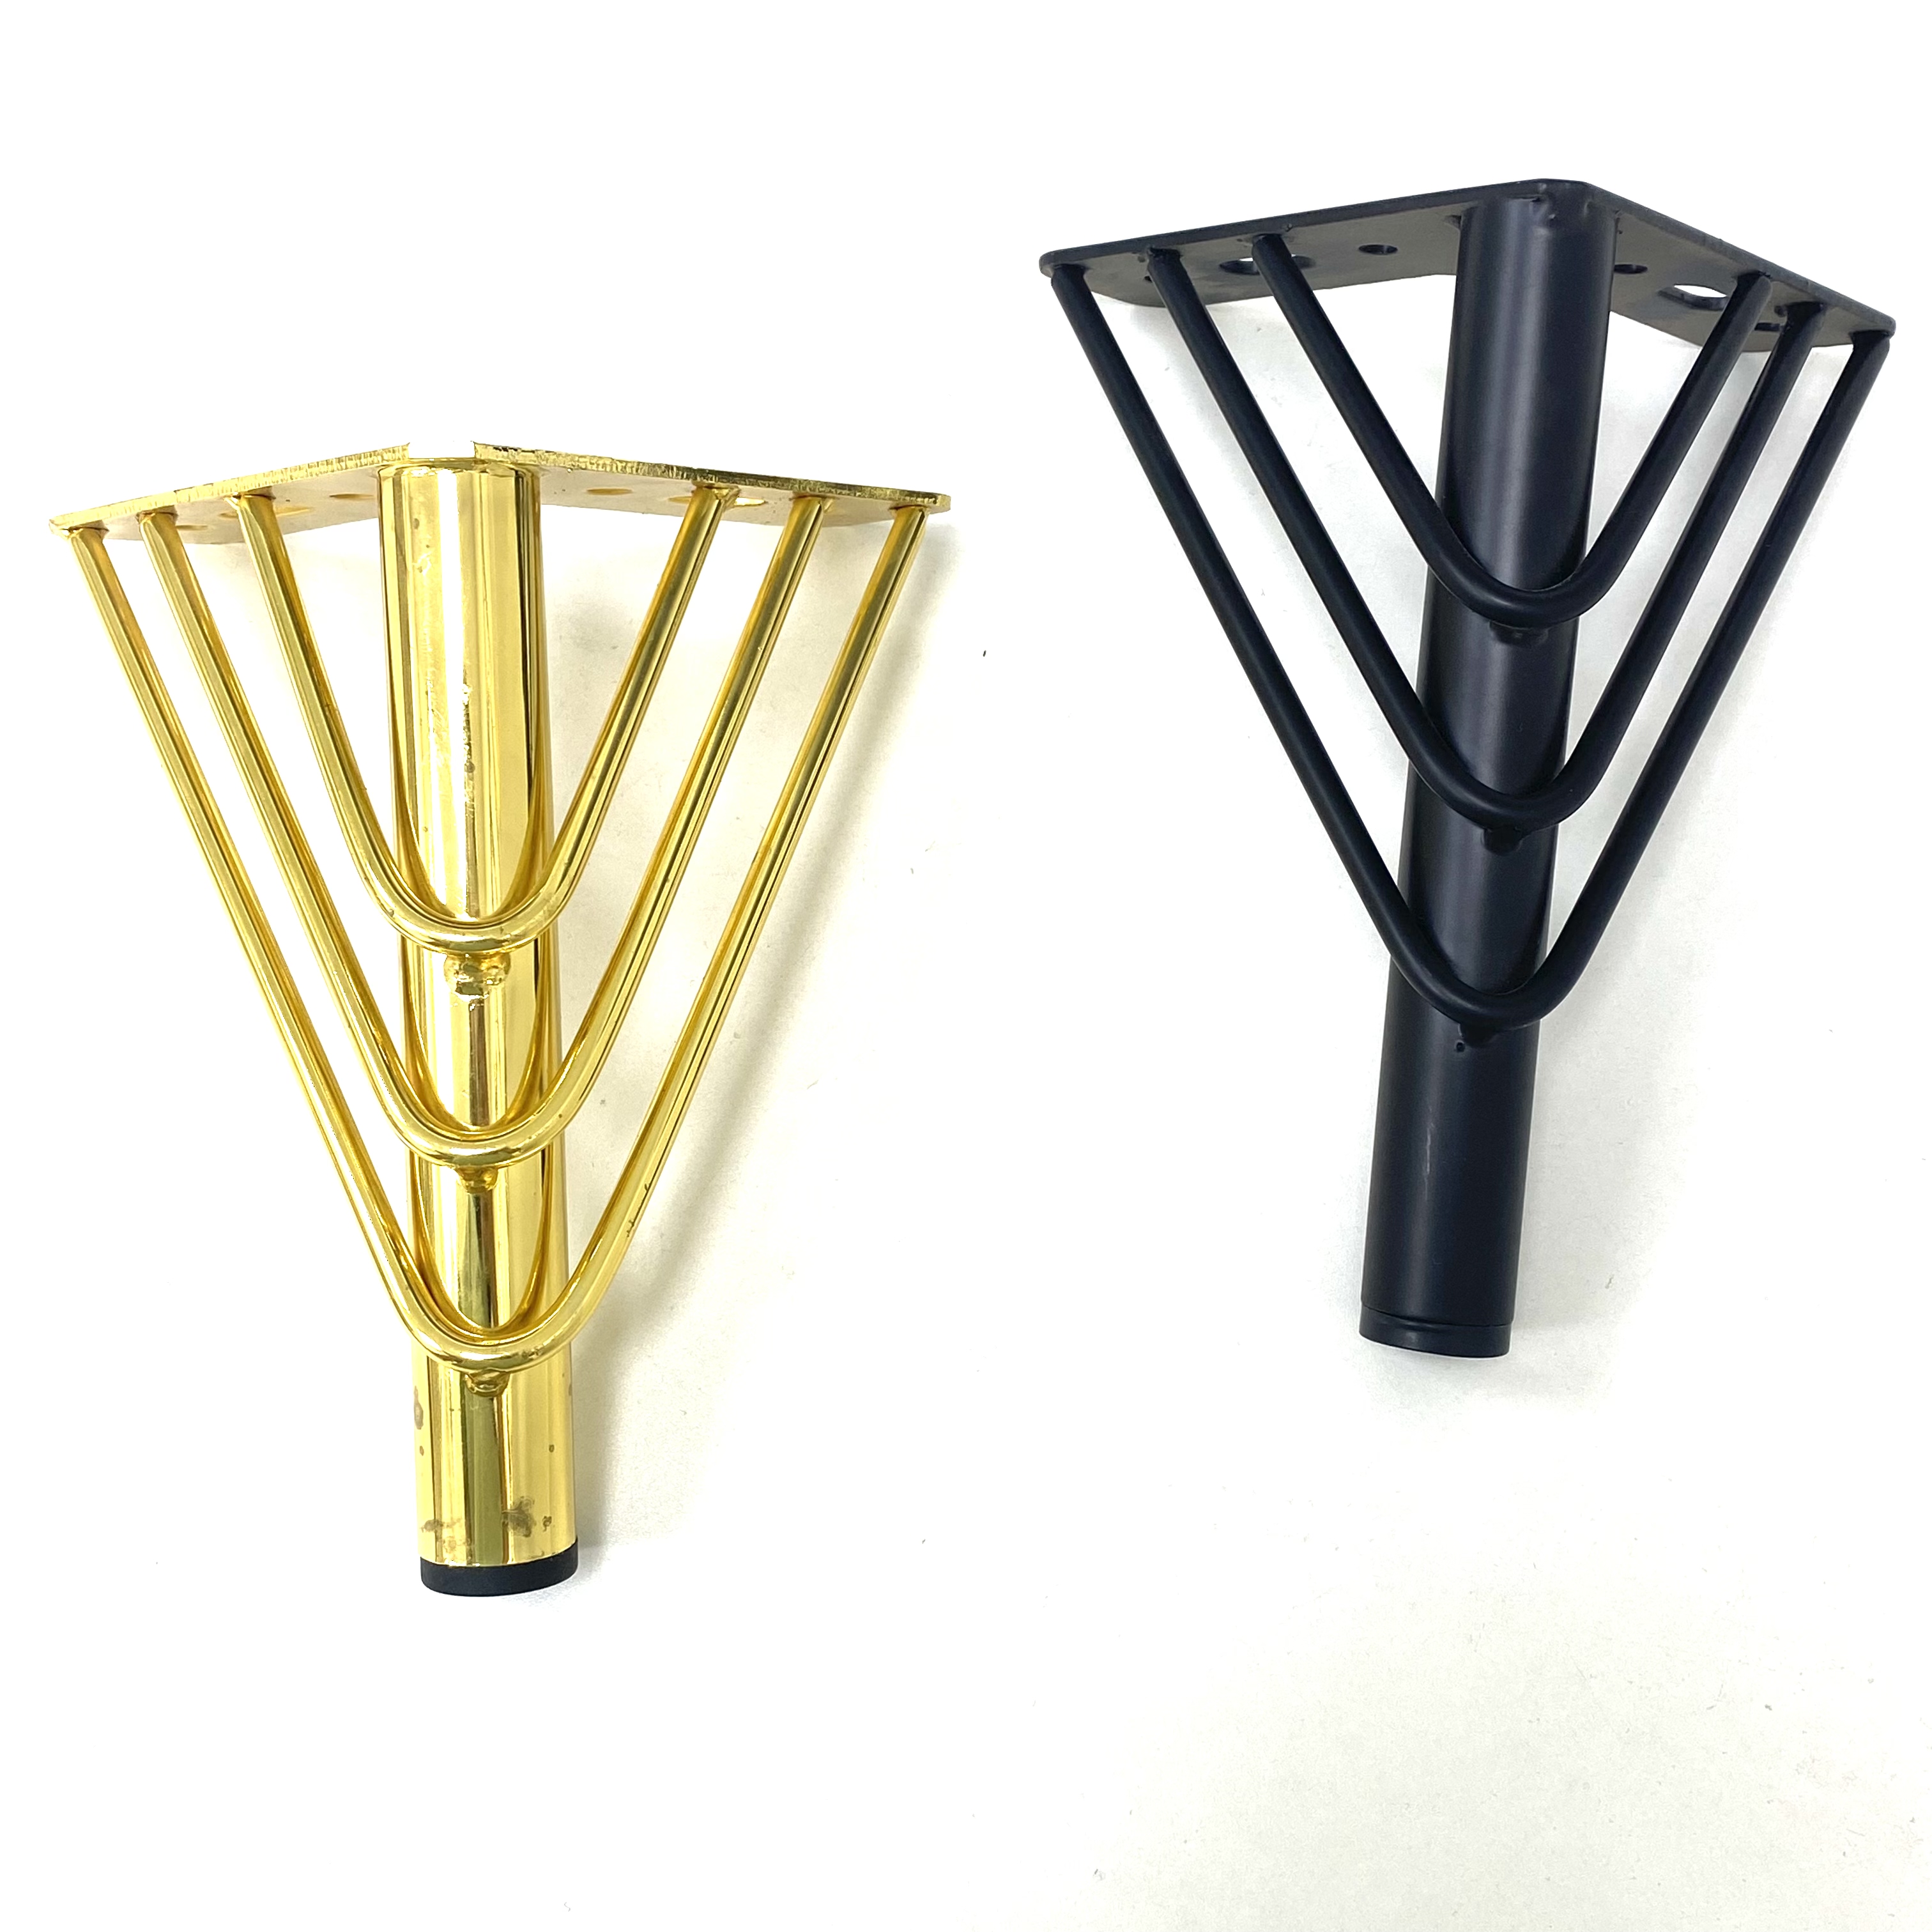 Gold Triangle Conor Sofa Legs For Furniture Couch